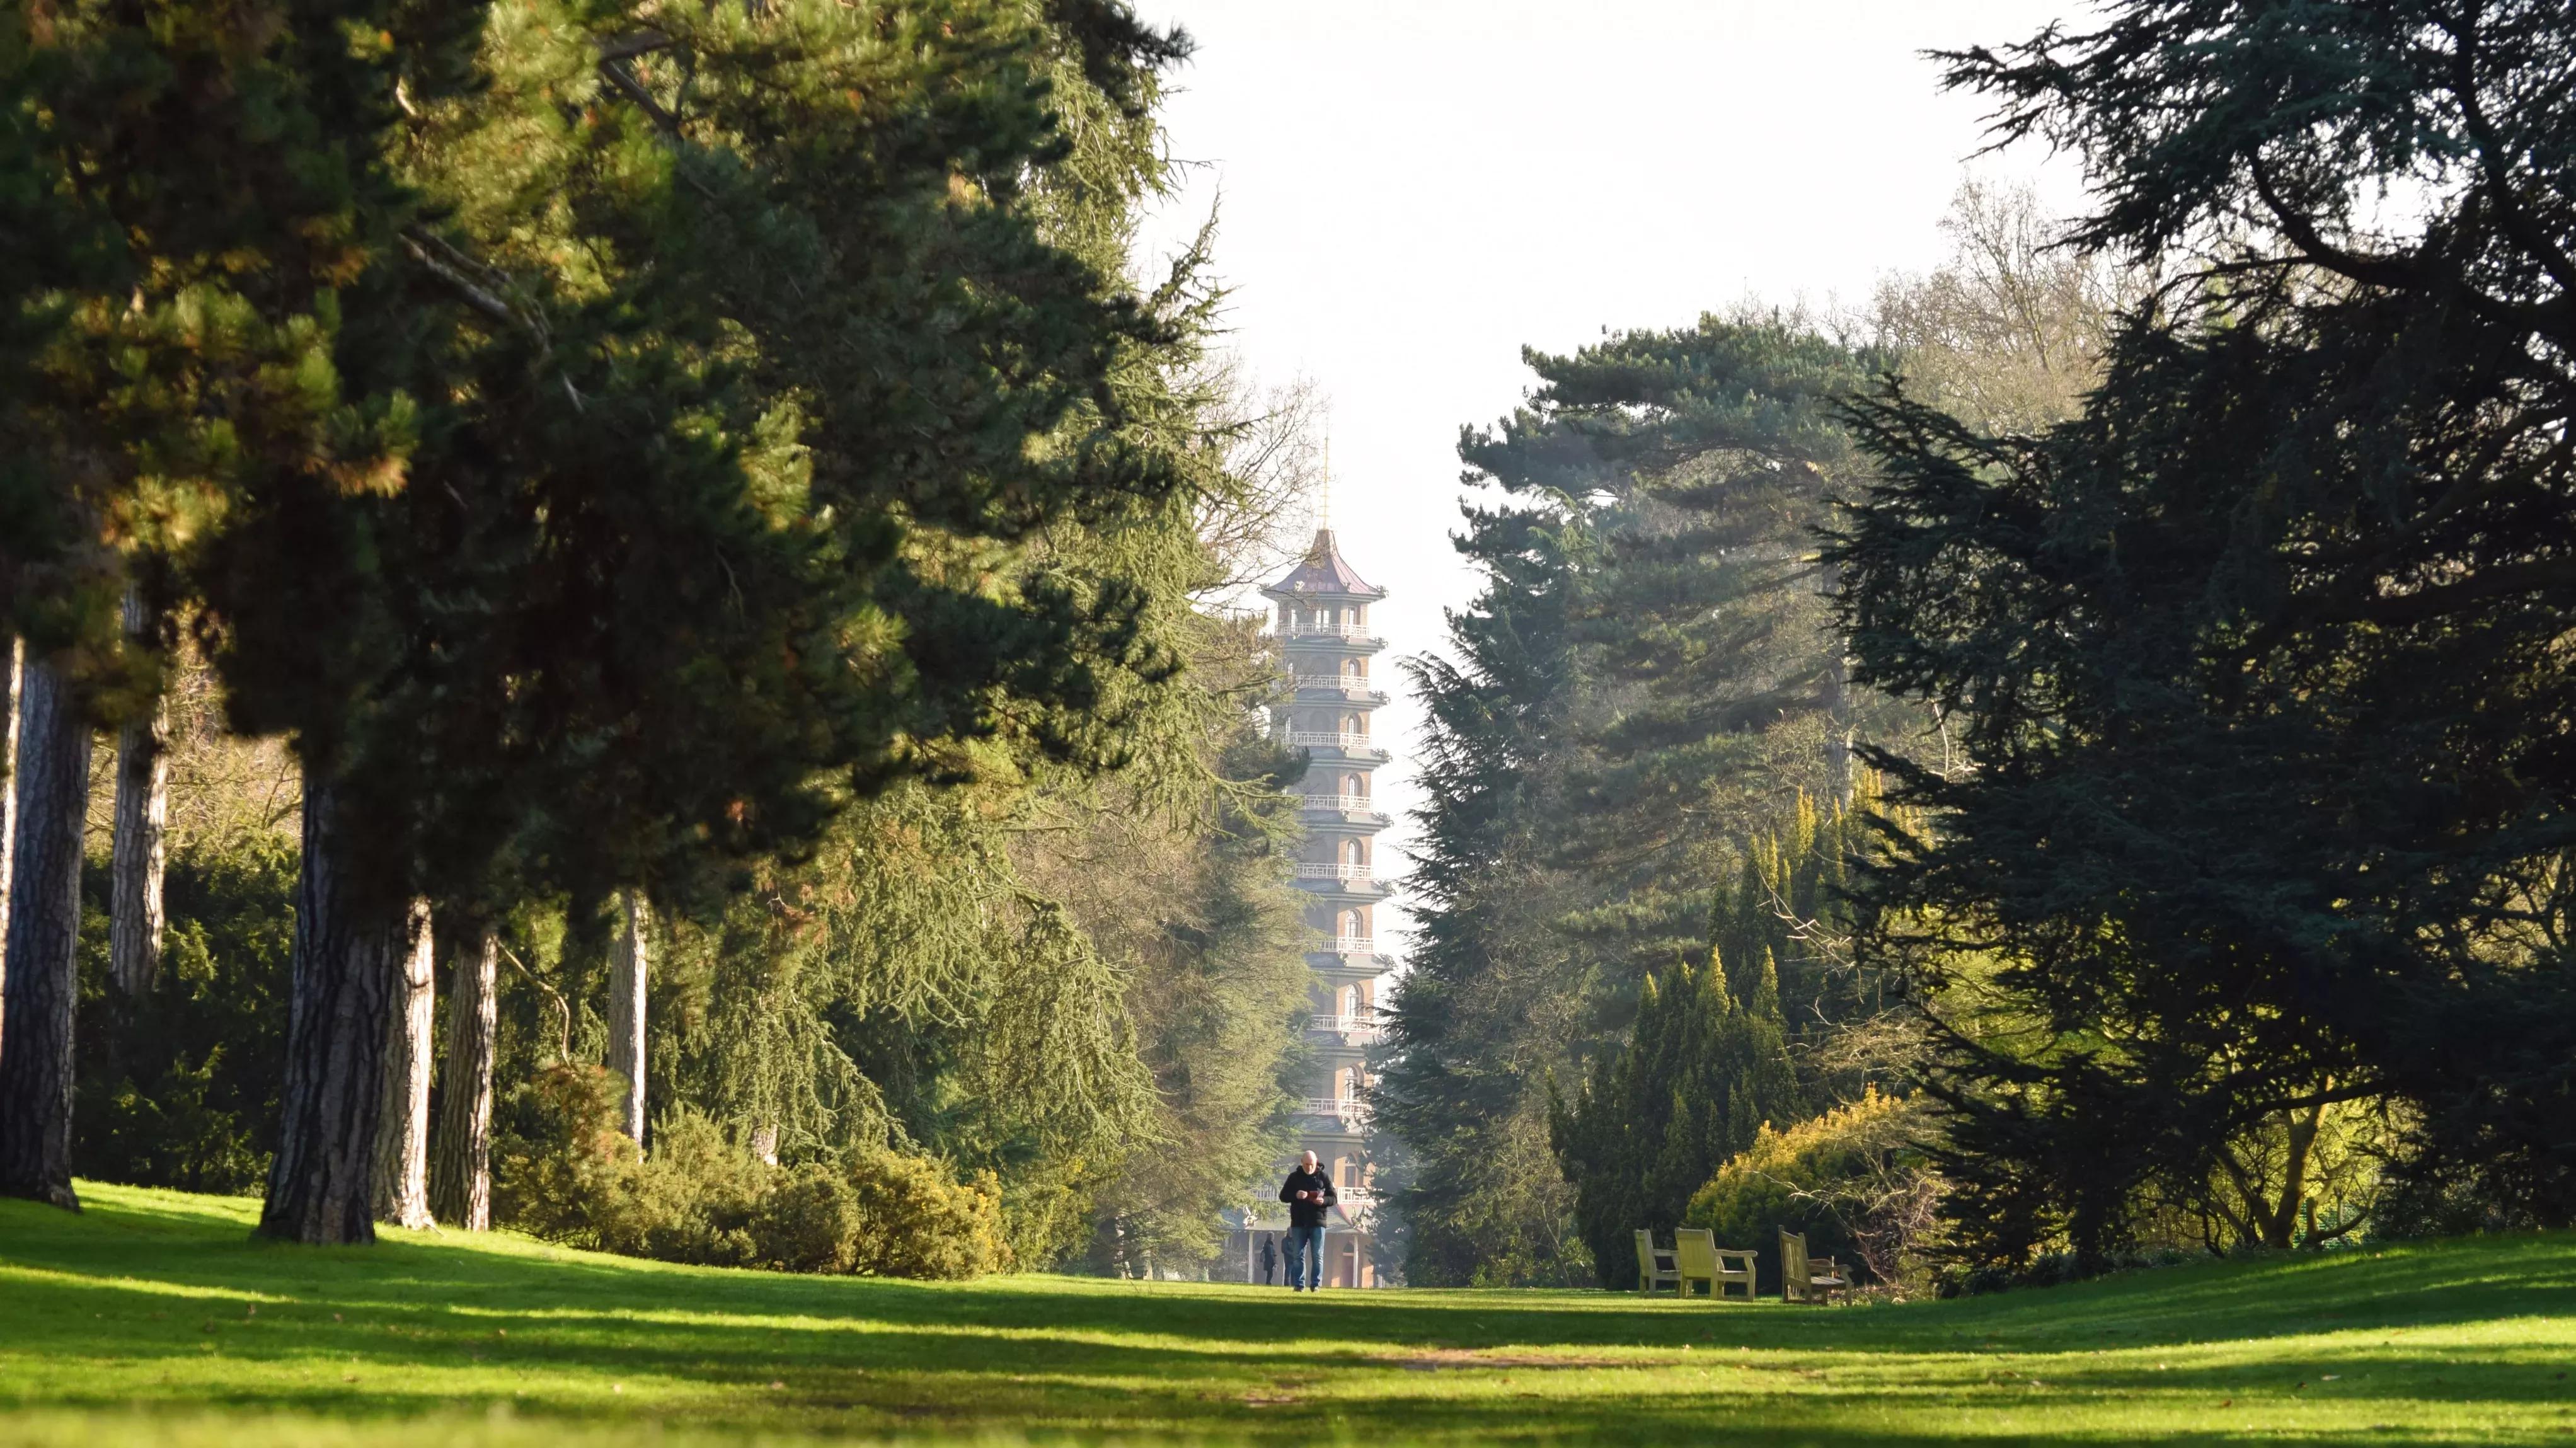 View along a vista with the Pagoda at the end and lined by trees